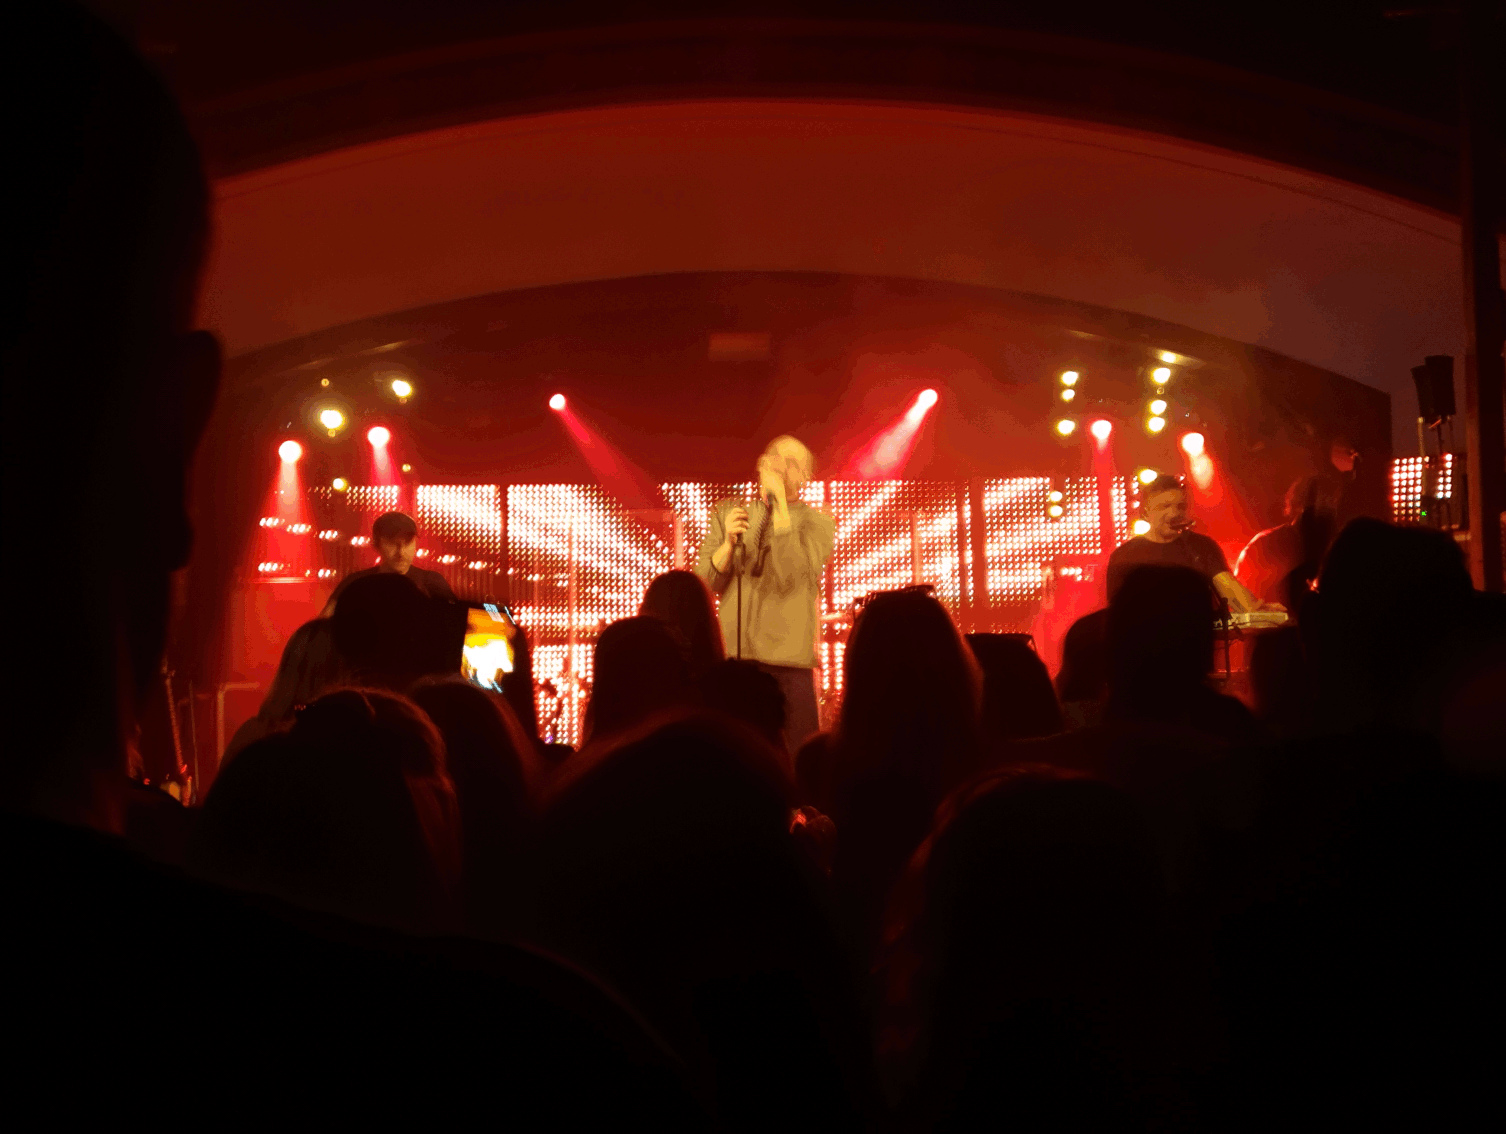 image of the ukranian band druga rika on stage surrounded by red lighting